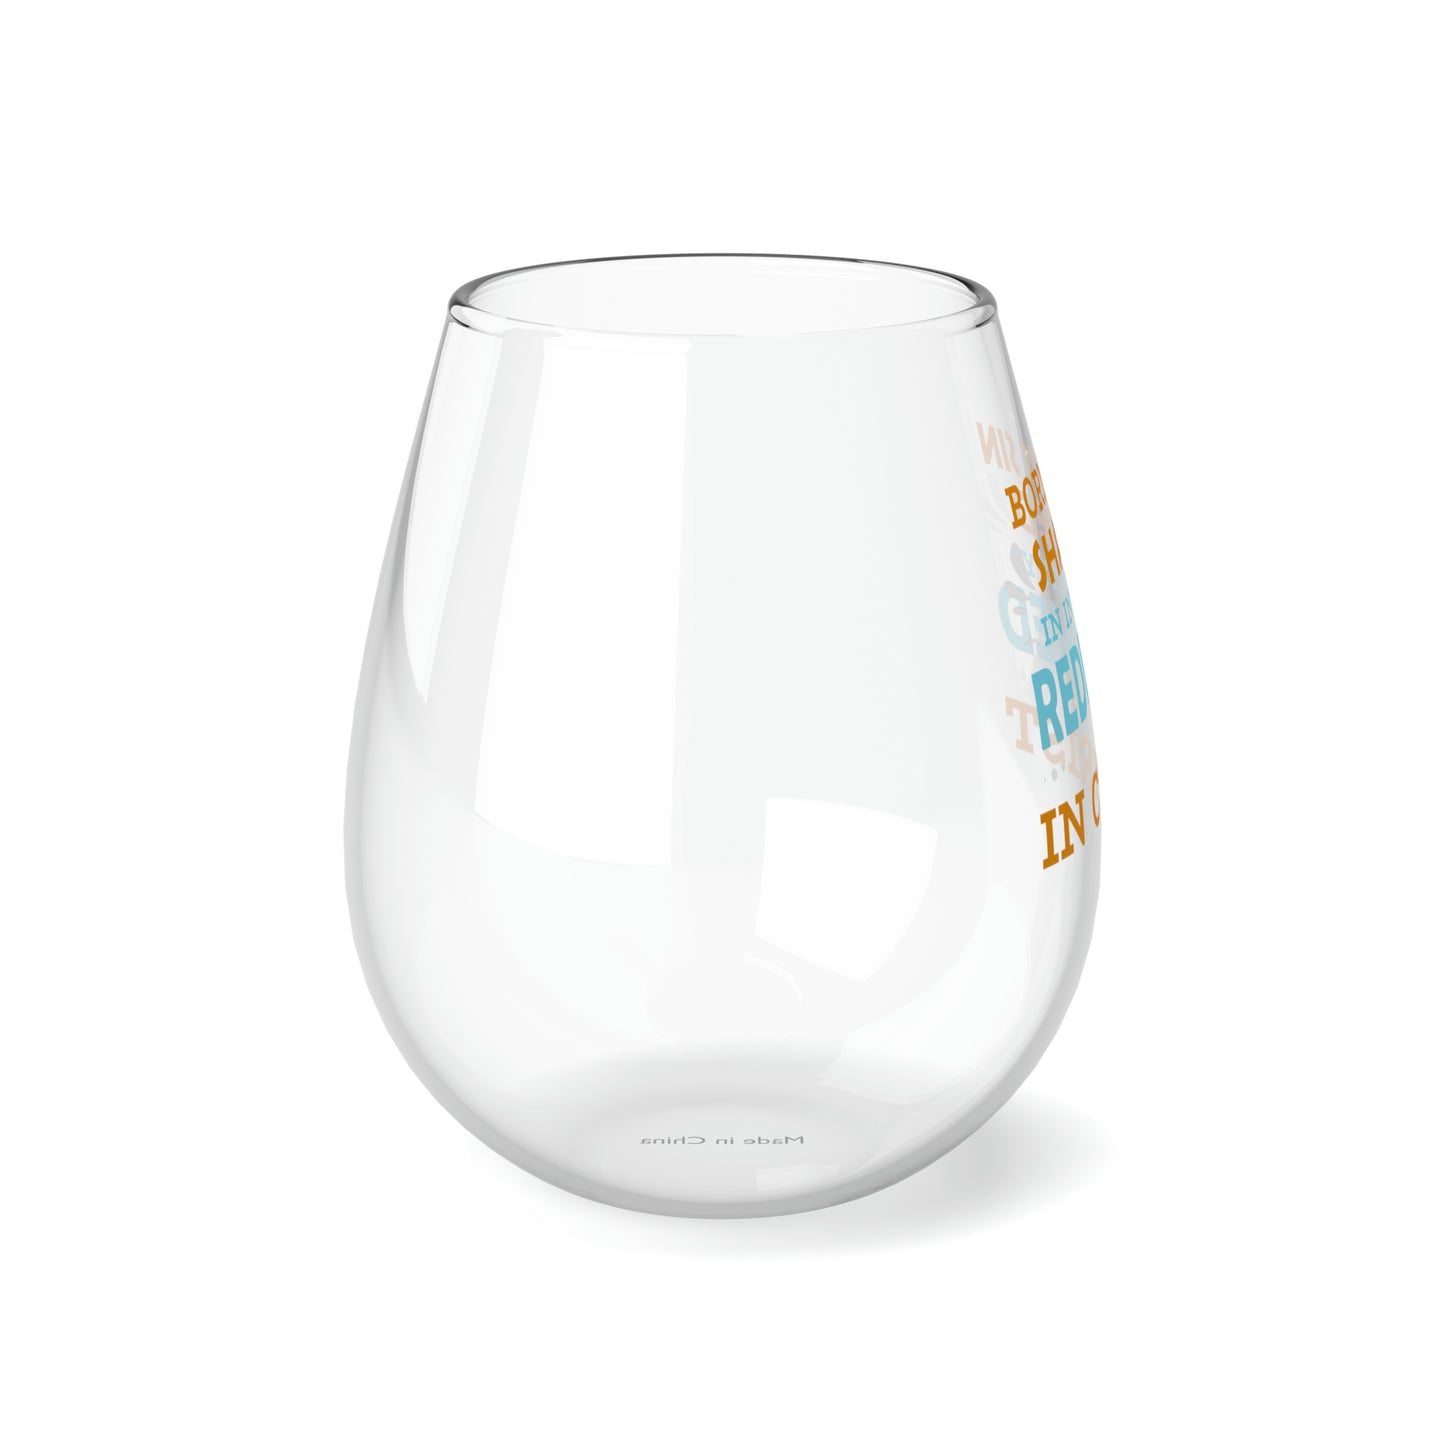 Born In Sin Shaped In Inequity Redeemed In Christ Stemless Wine Glass, 11.75oz